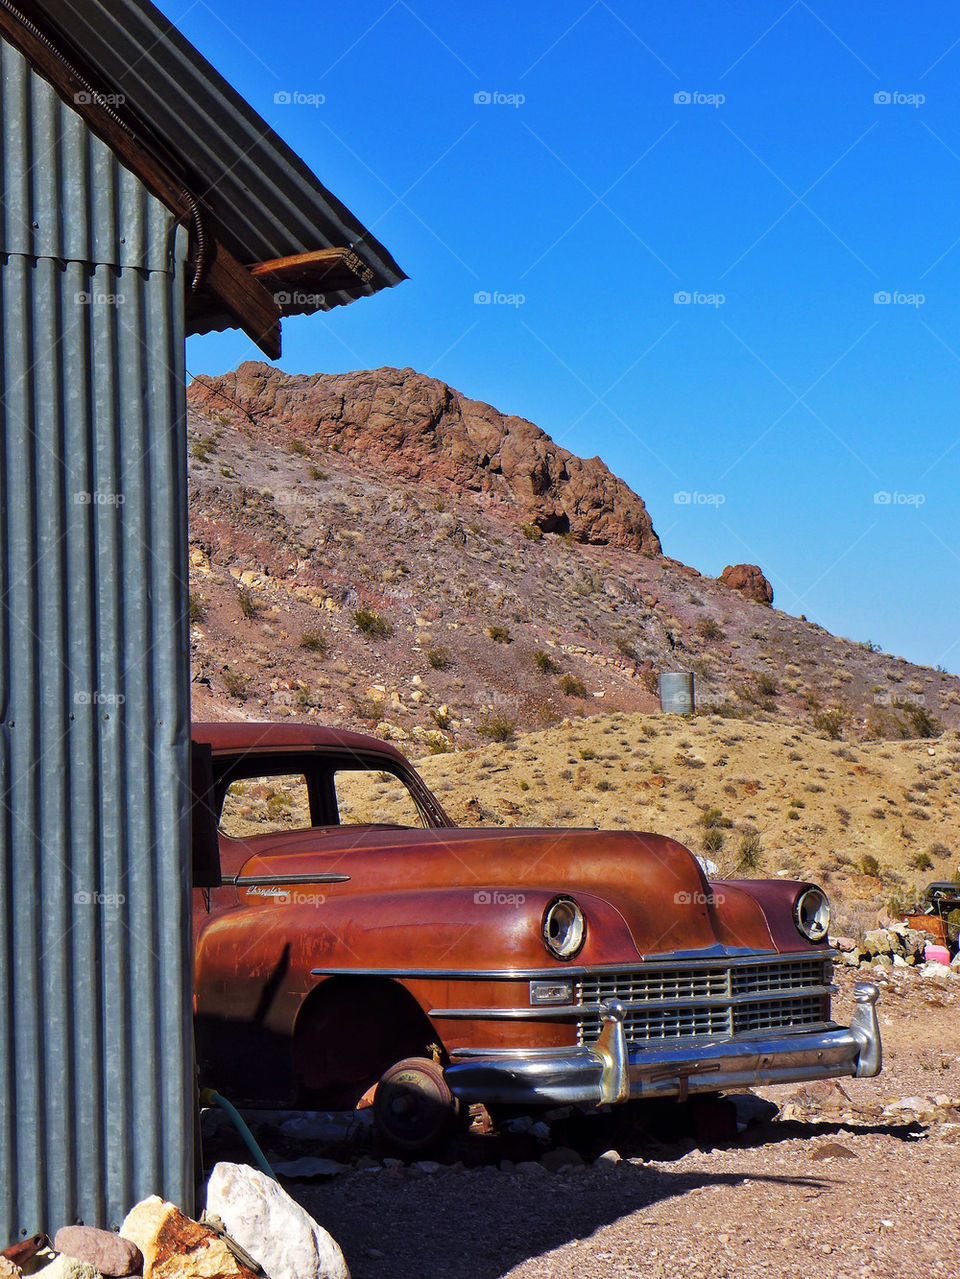 Old rusty car in the middle of the desert